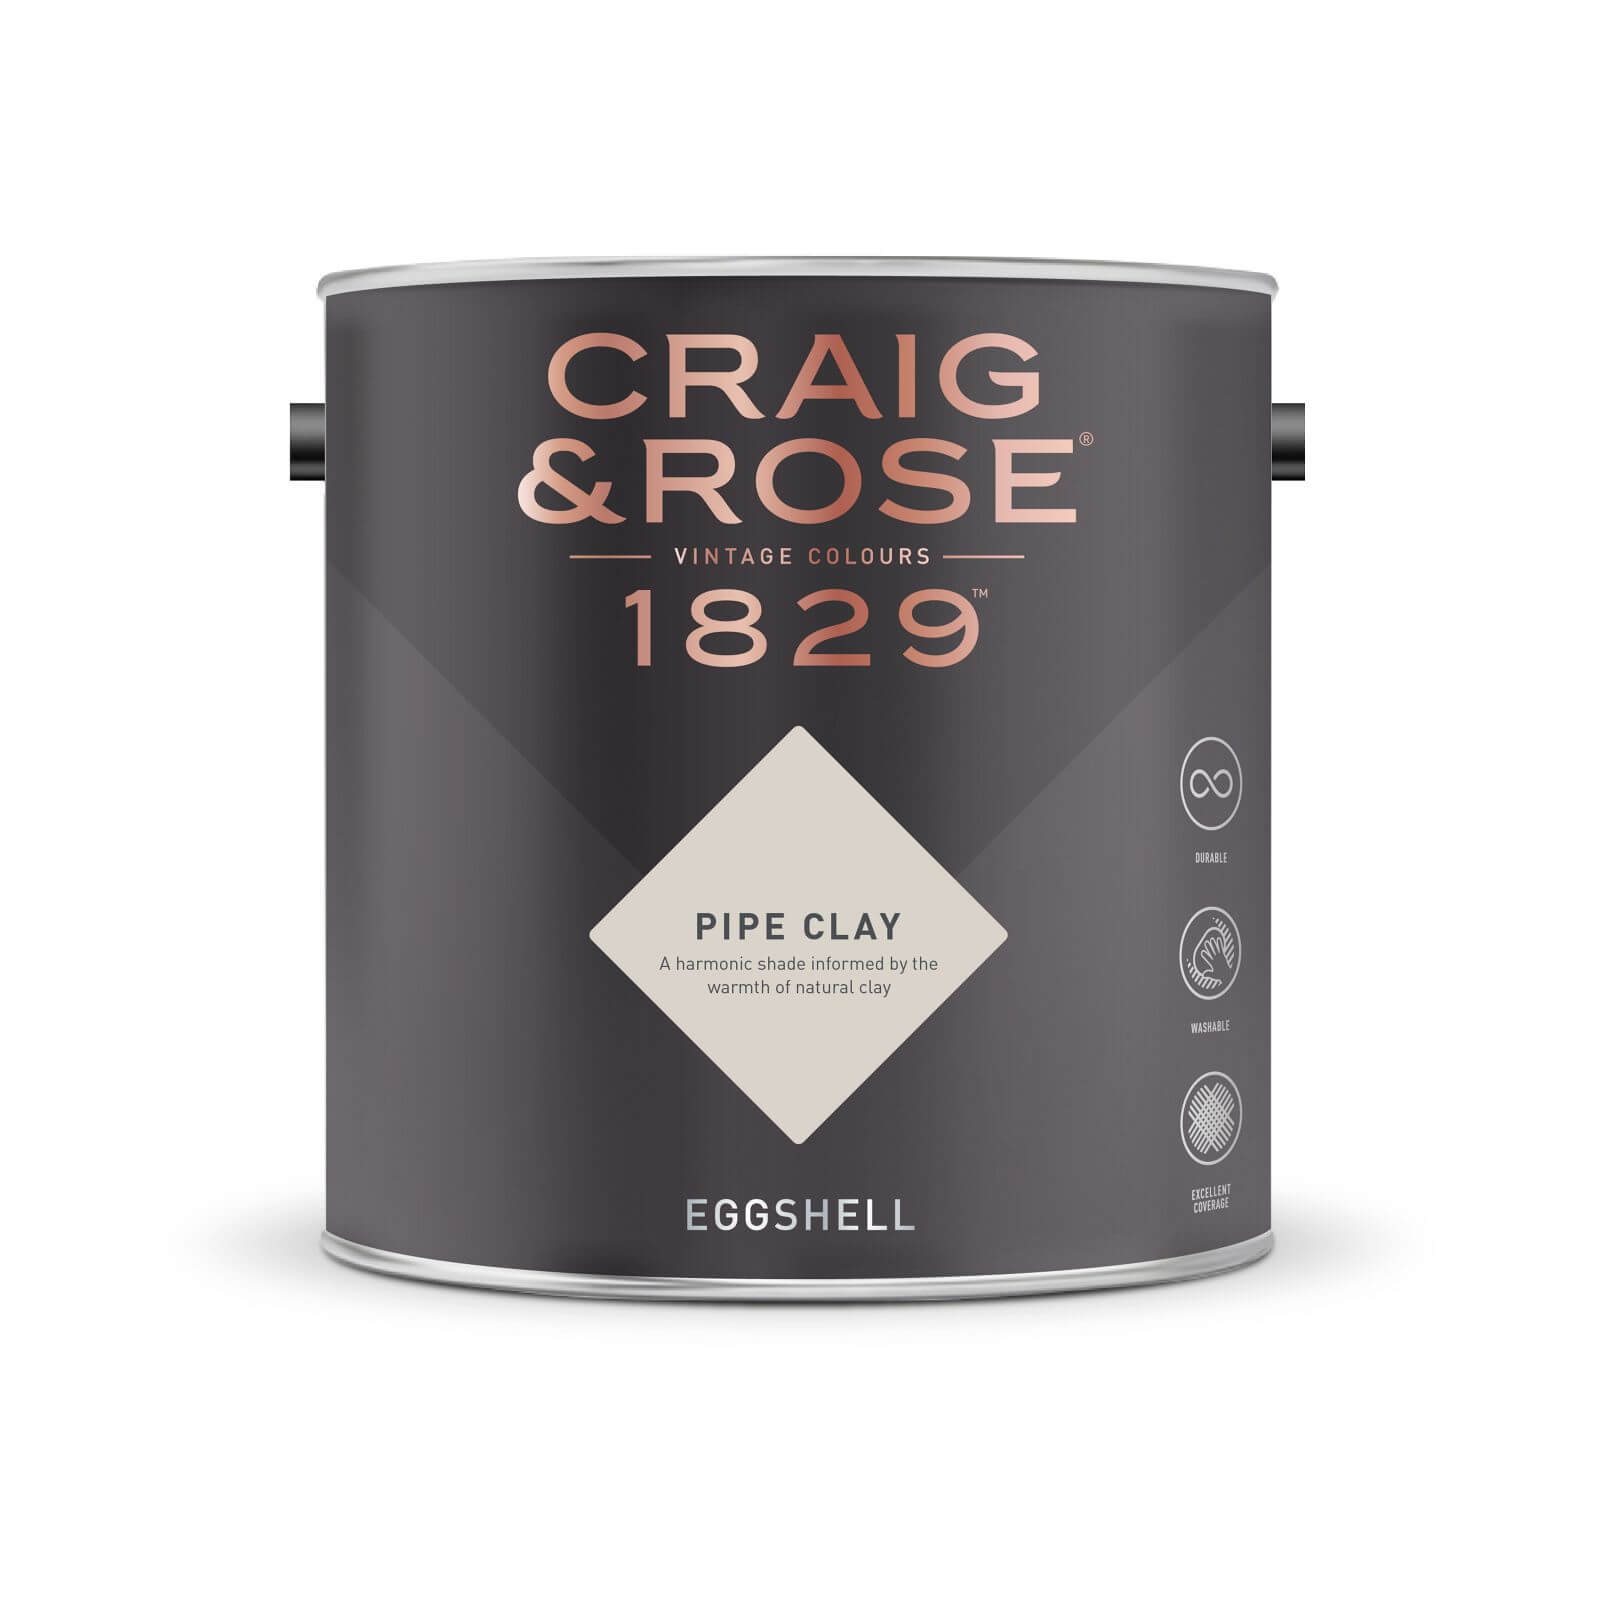 Craig & Rose 1829 Eggshell Paint Pipe Clay - 2.5L